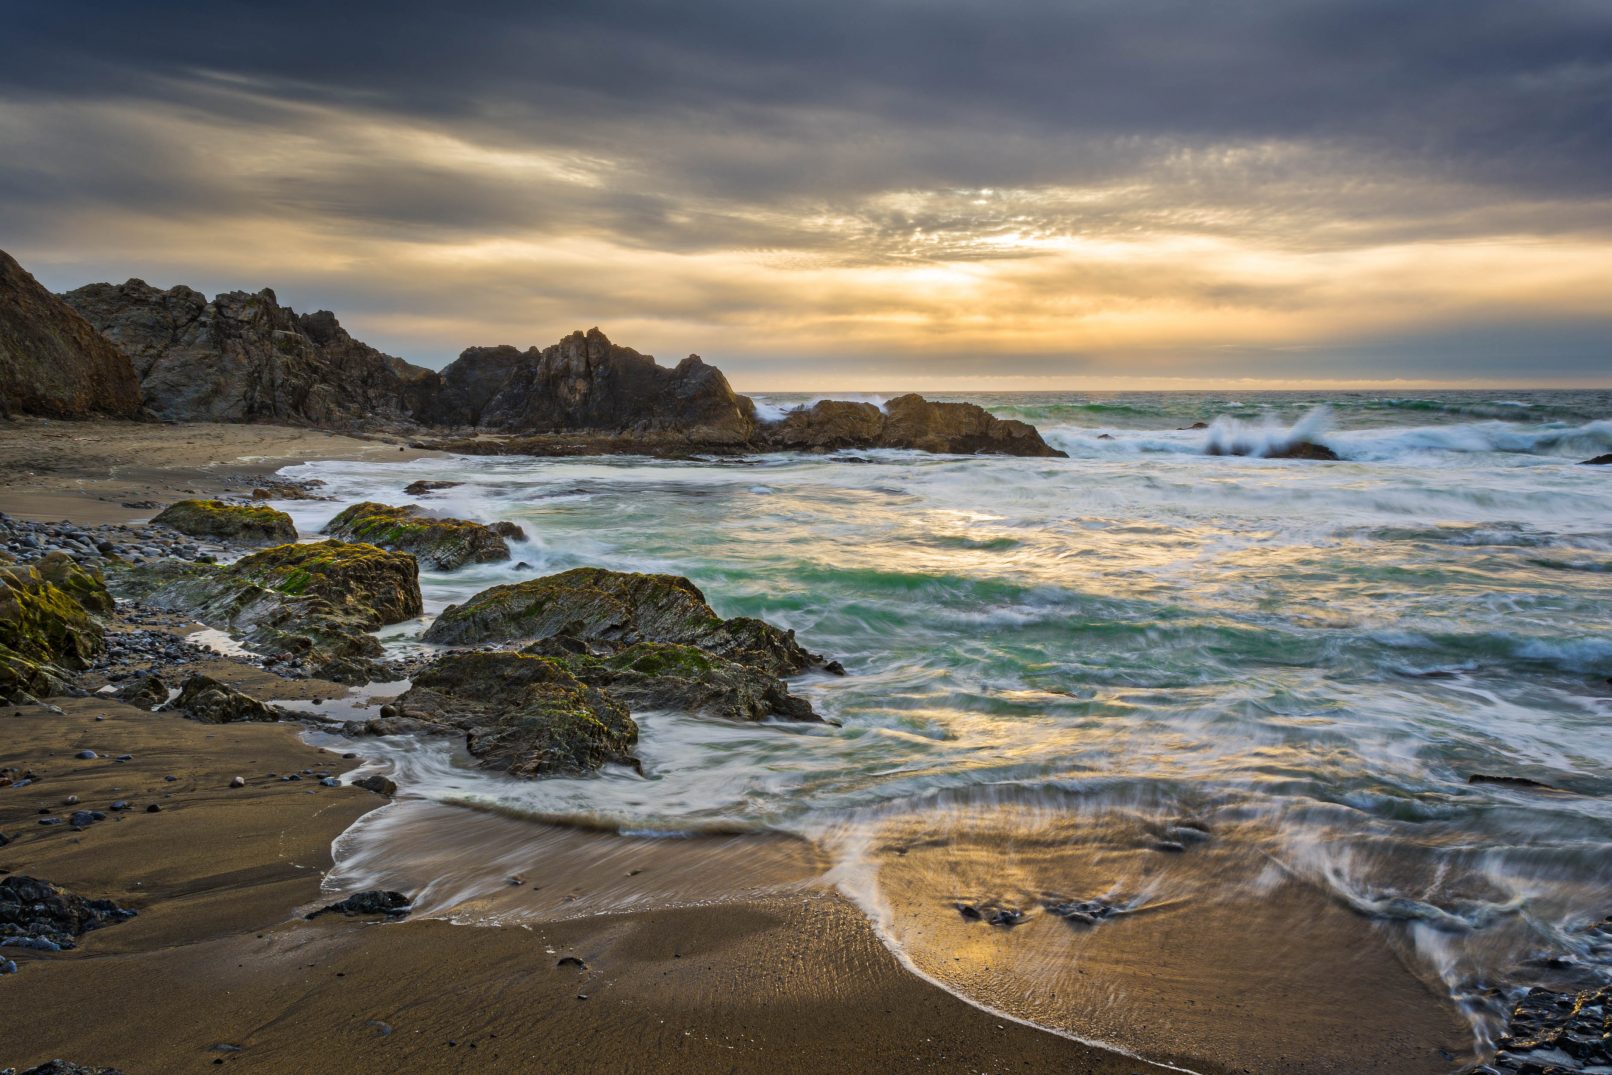 McClure's Beach, California with waves, rocks and sunset